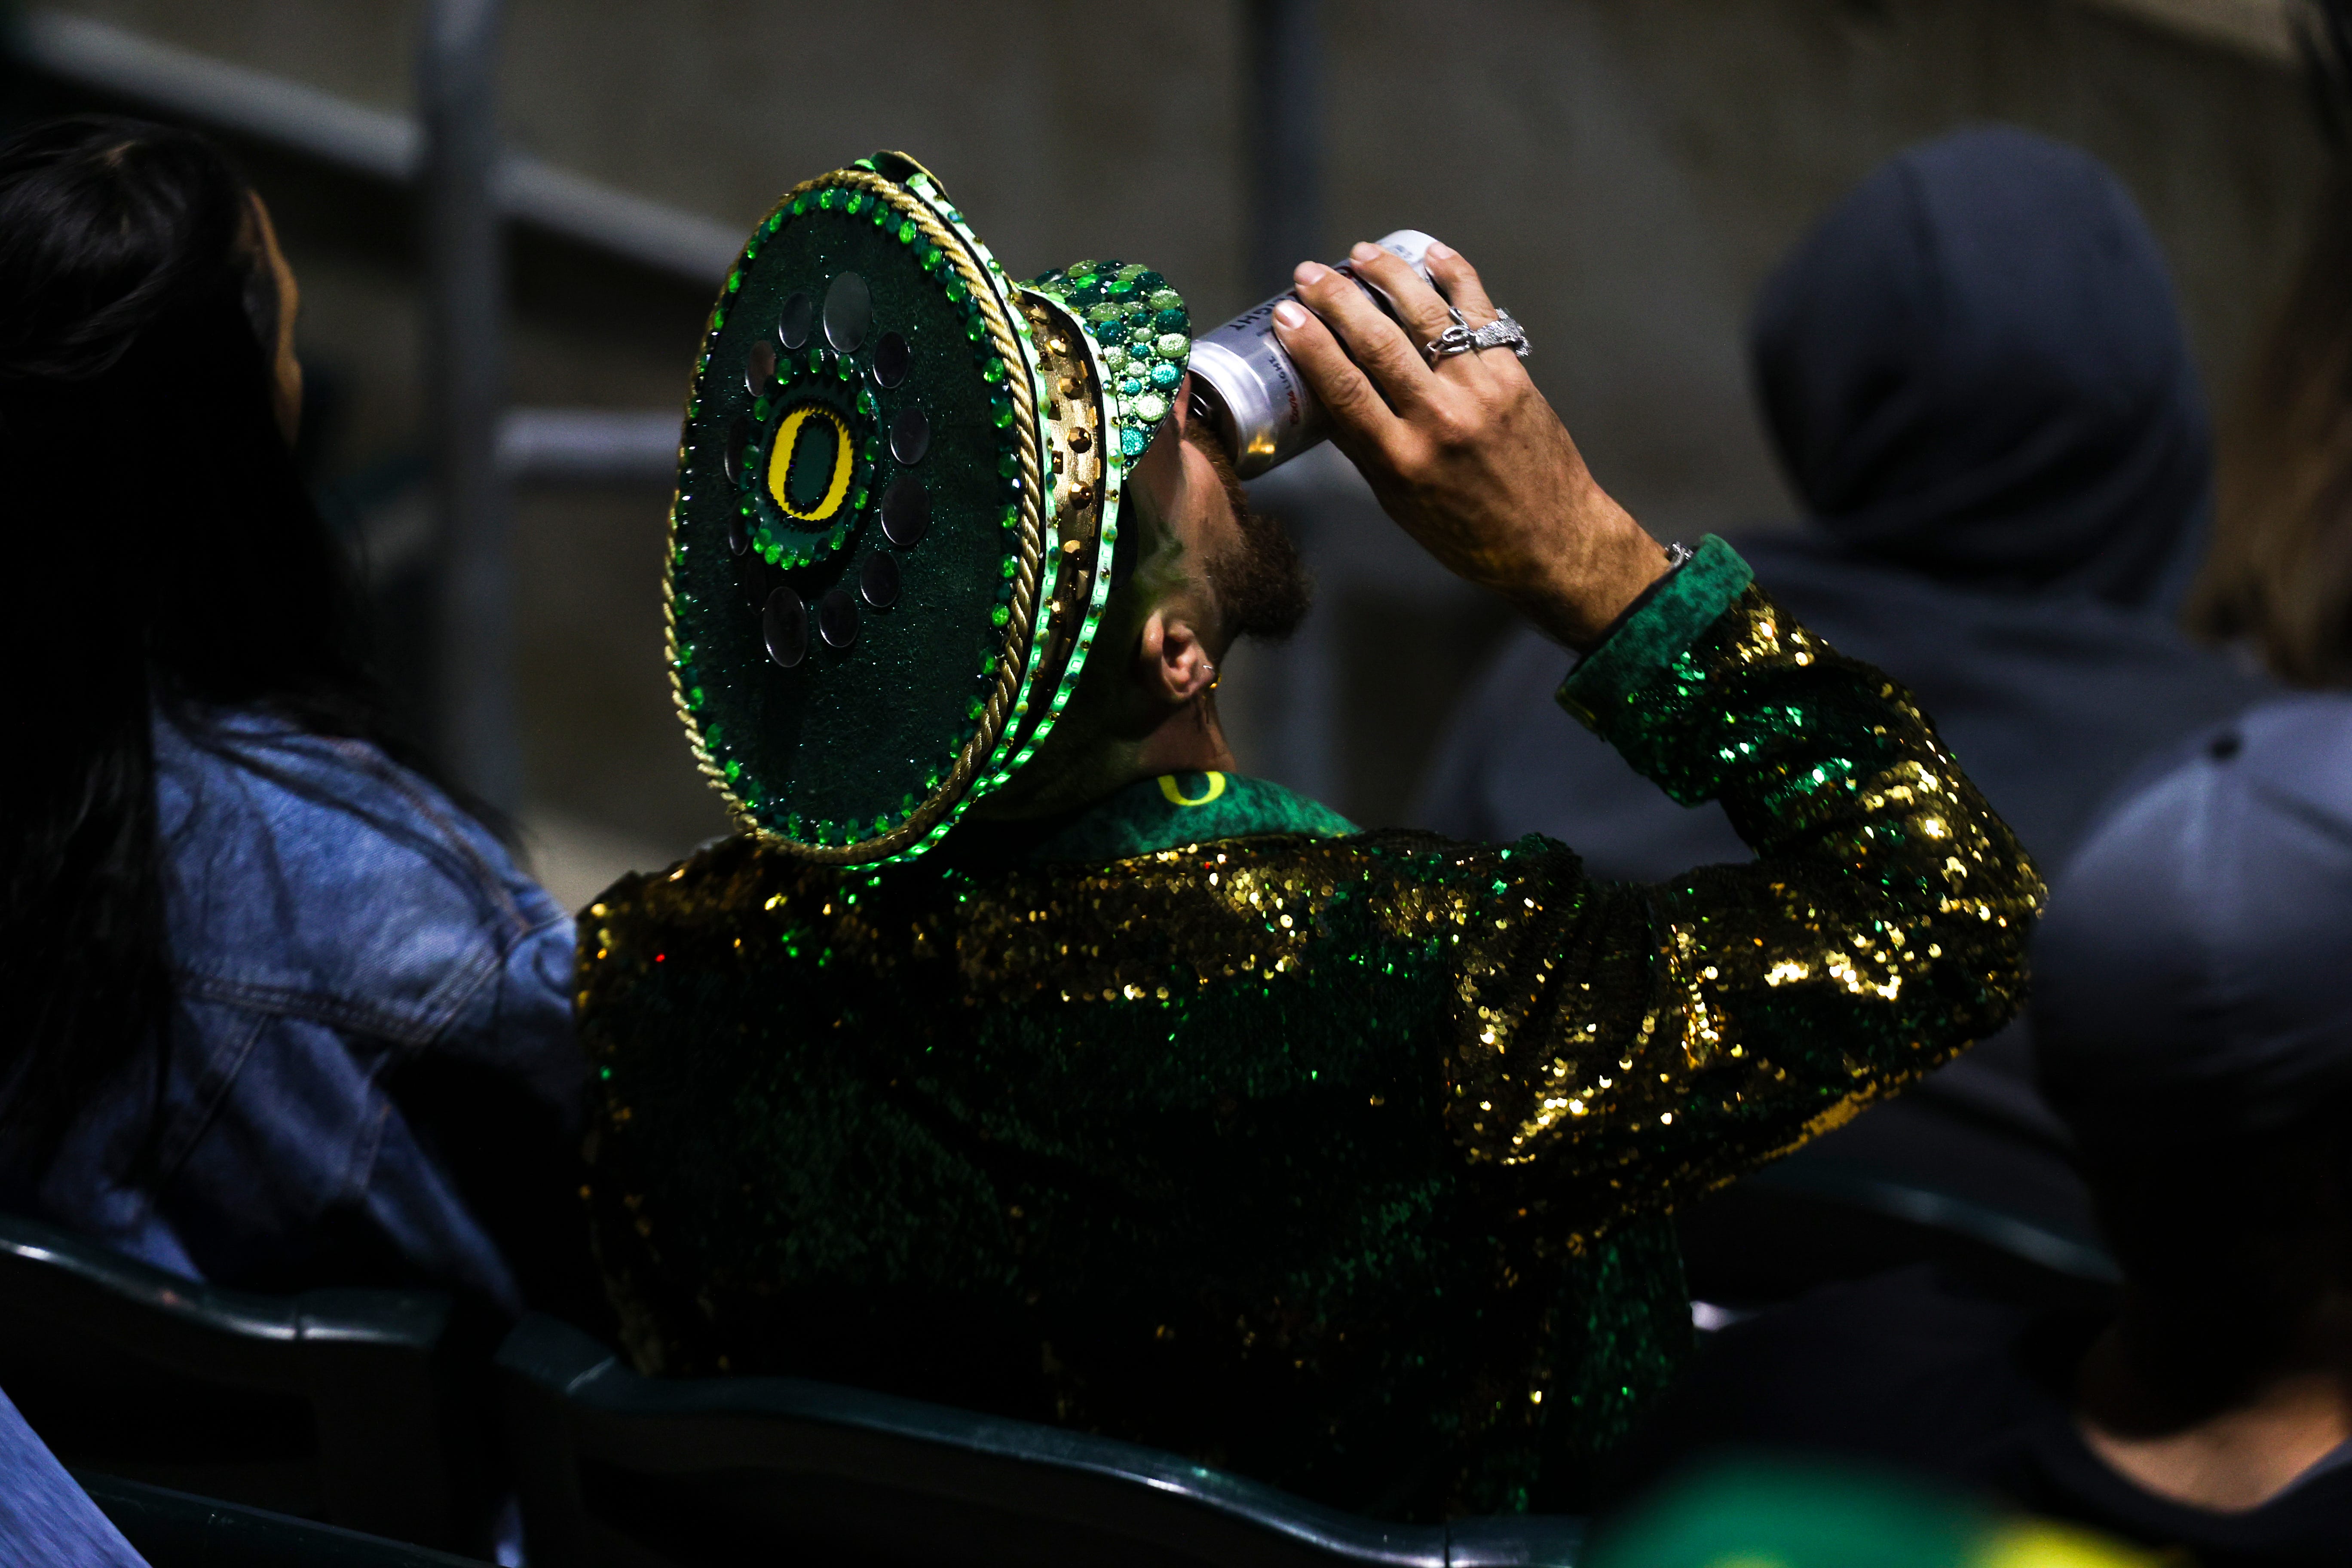 A Oregon Ducks fan celebrates at the close of the Ducks’ 7-3 victory against the Gonzaga Bulldogs in the NCAA Regional game at PK Park in Eugene, Oregon on Saturday, June 5, 2021.